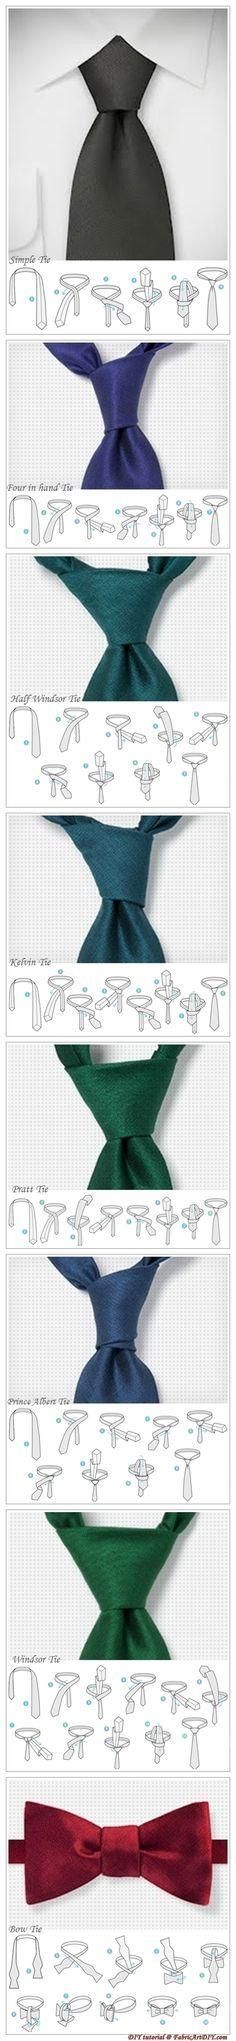 Classic tie knot instructions